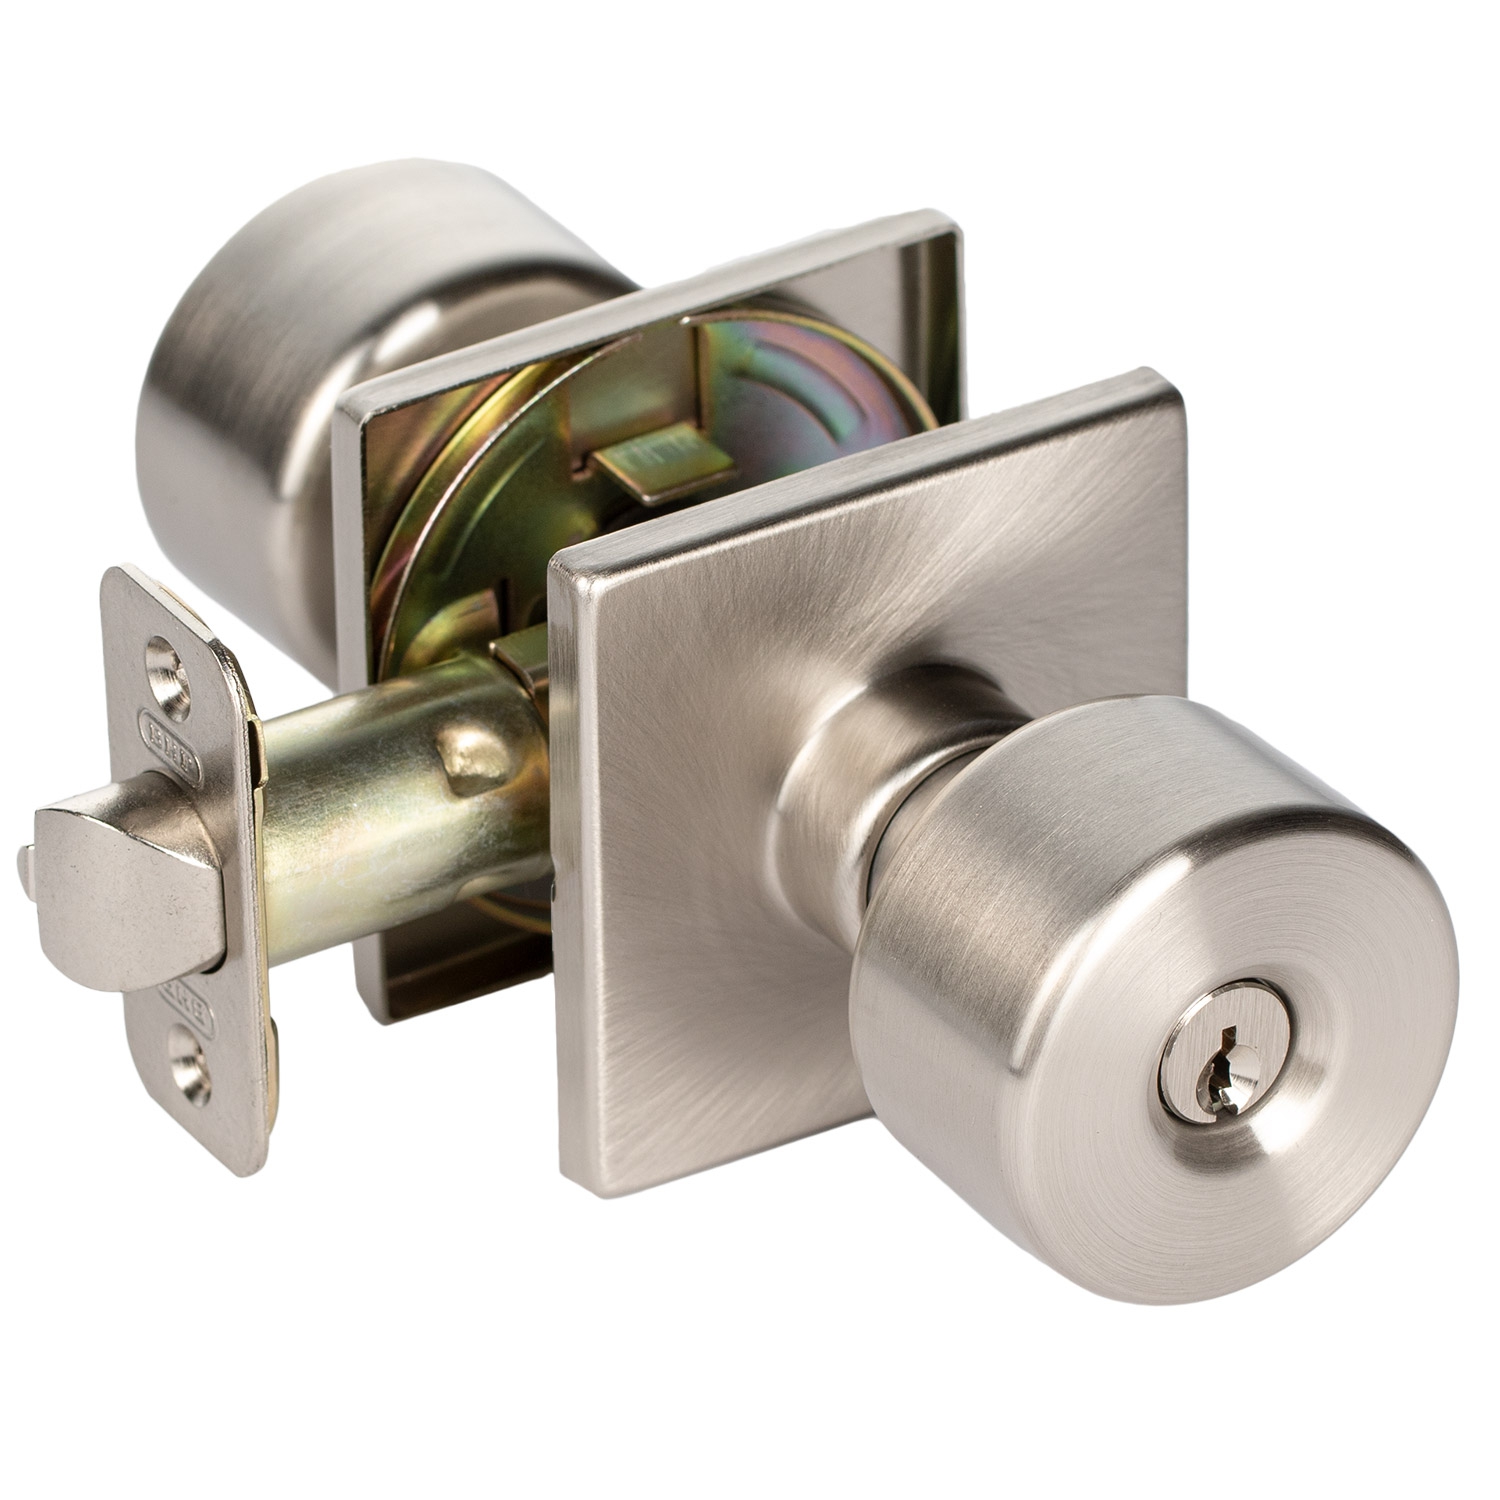 Satin Nickel Flat Keyed Entry Door Knob / Deadbolt Combo Pack with Square Rose - image 2 of 4